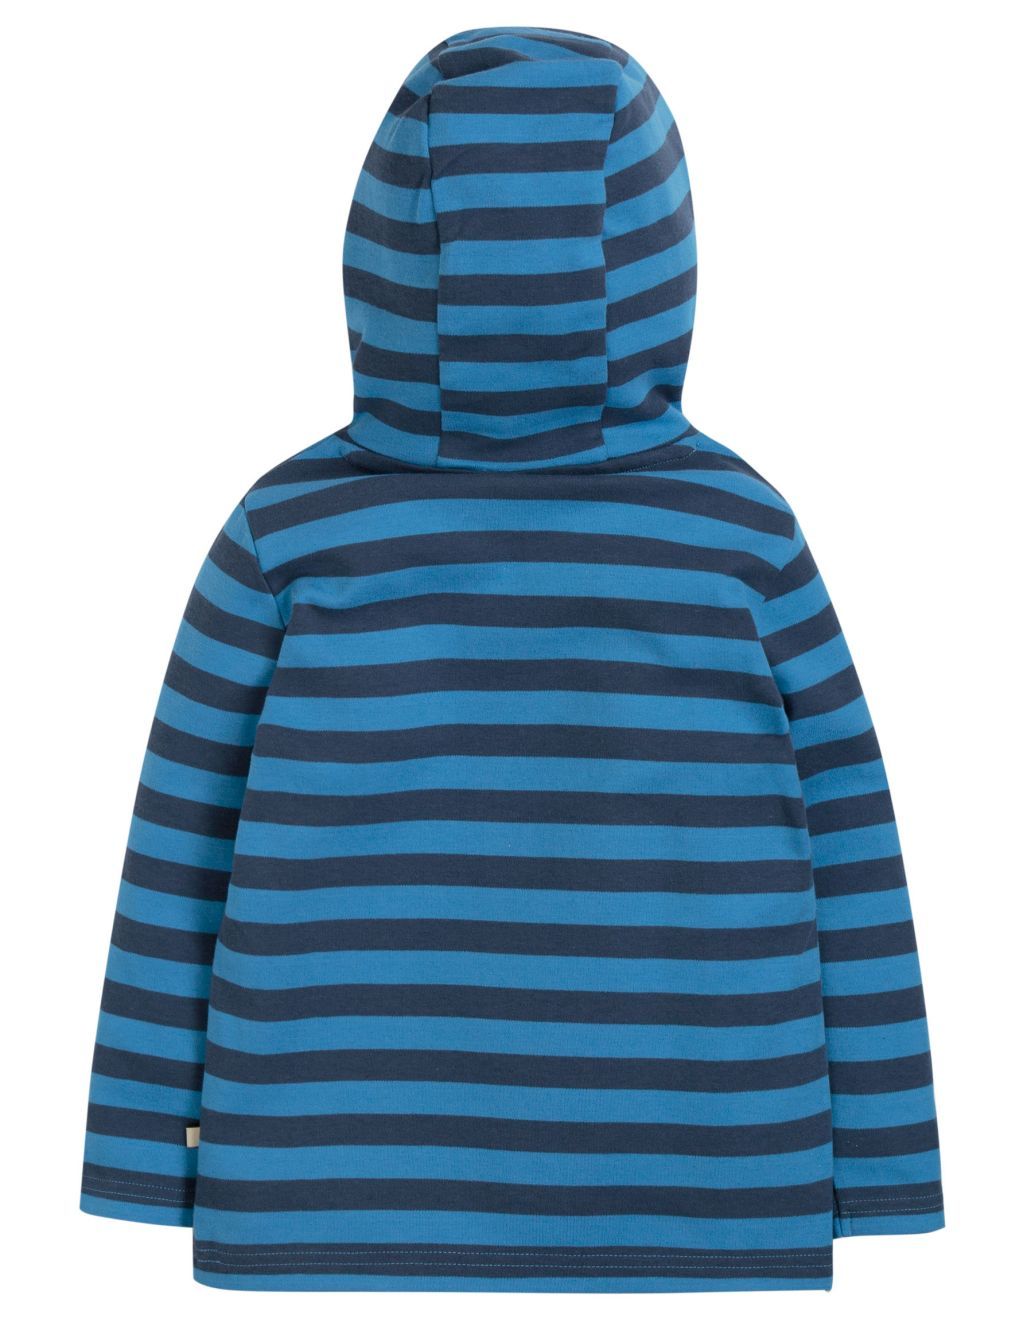 Campfire Hooded Top sail blue stripe/Angler Fish 122/128